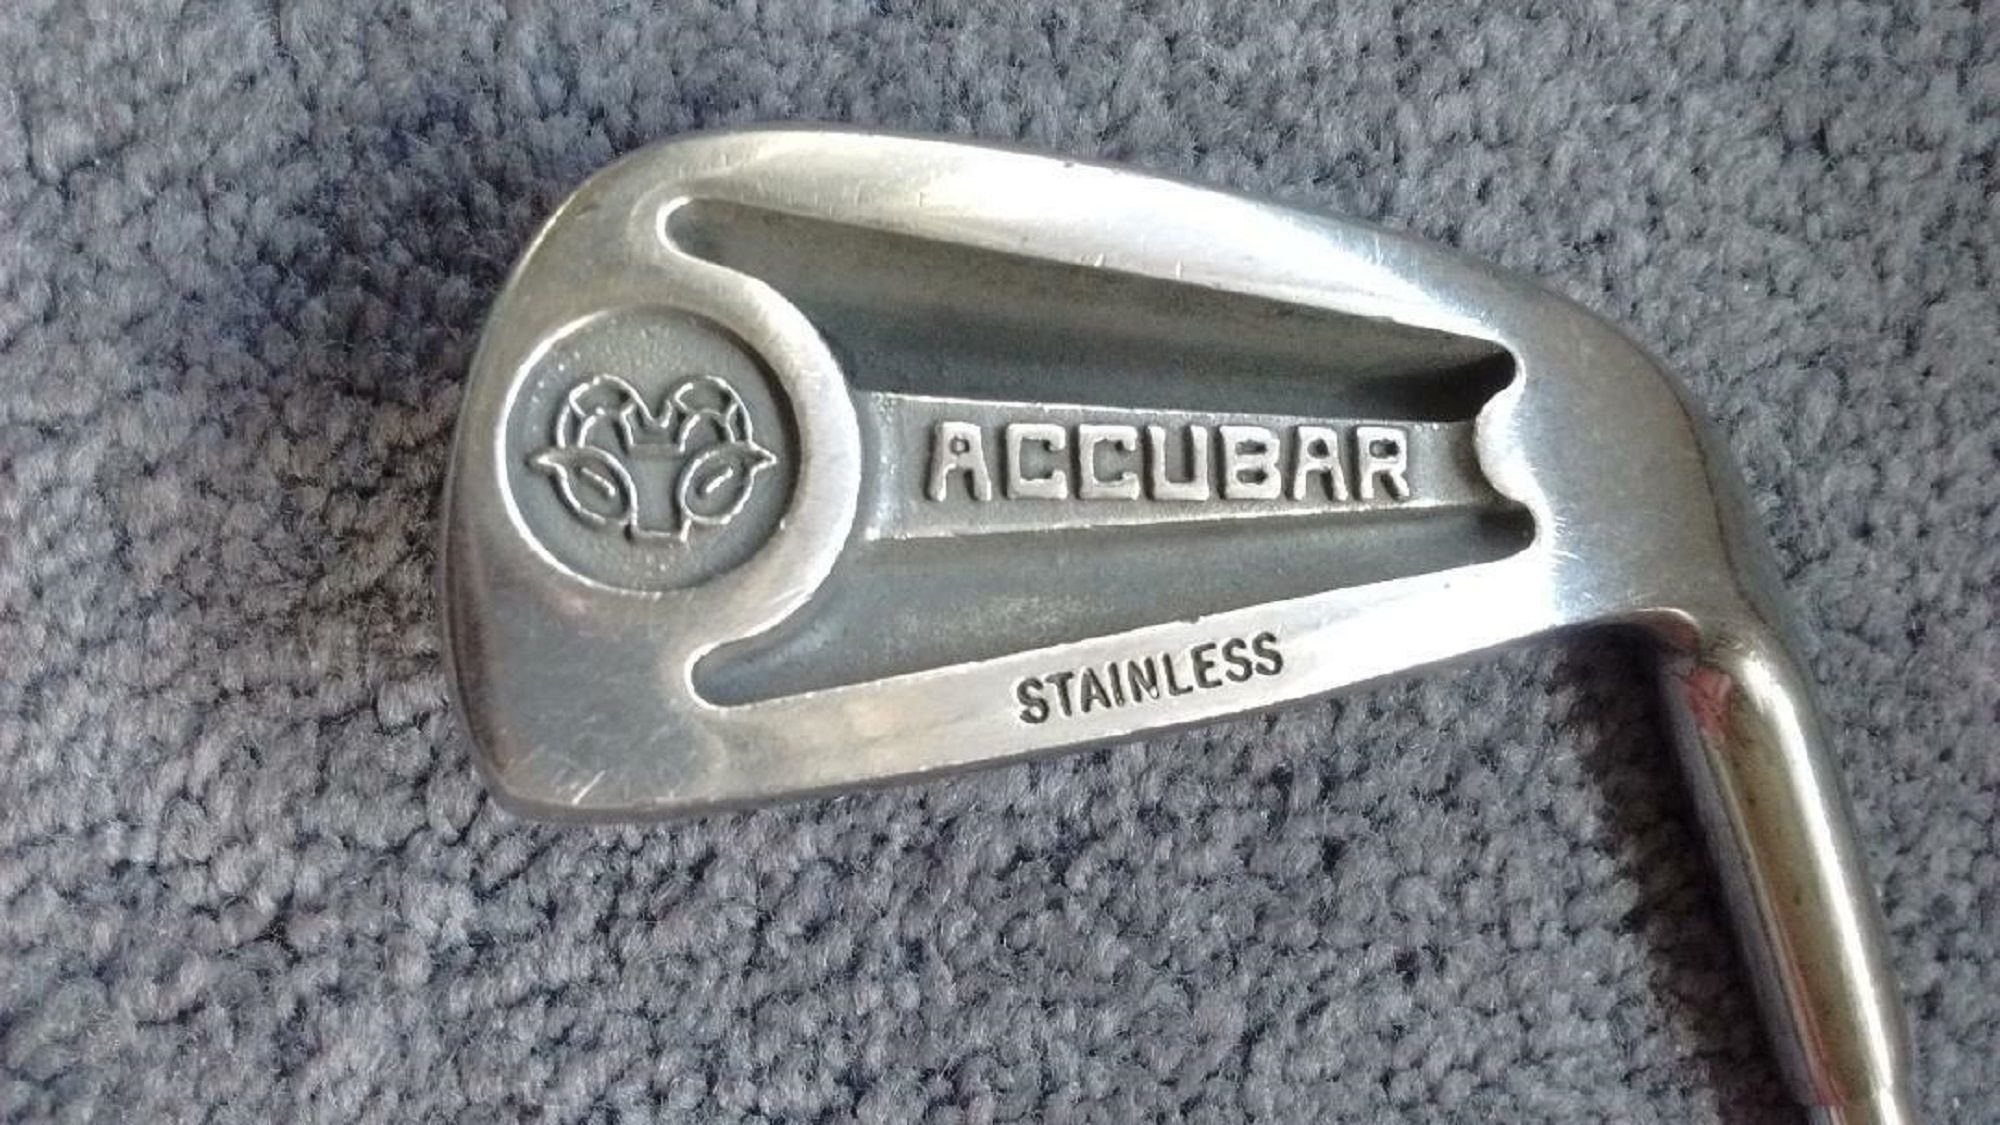 A close-up view of the Accubar Iron